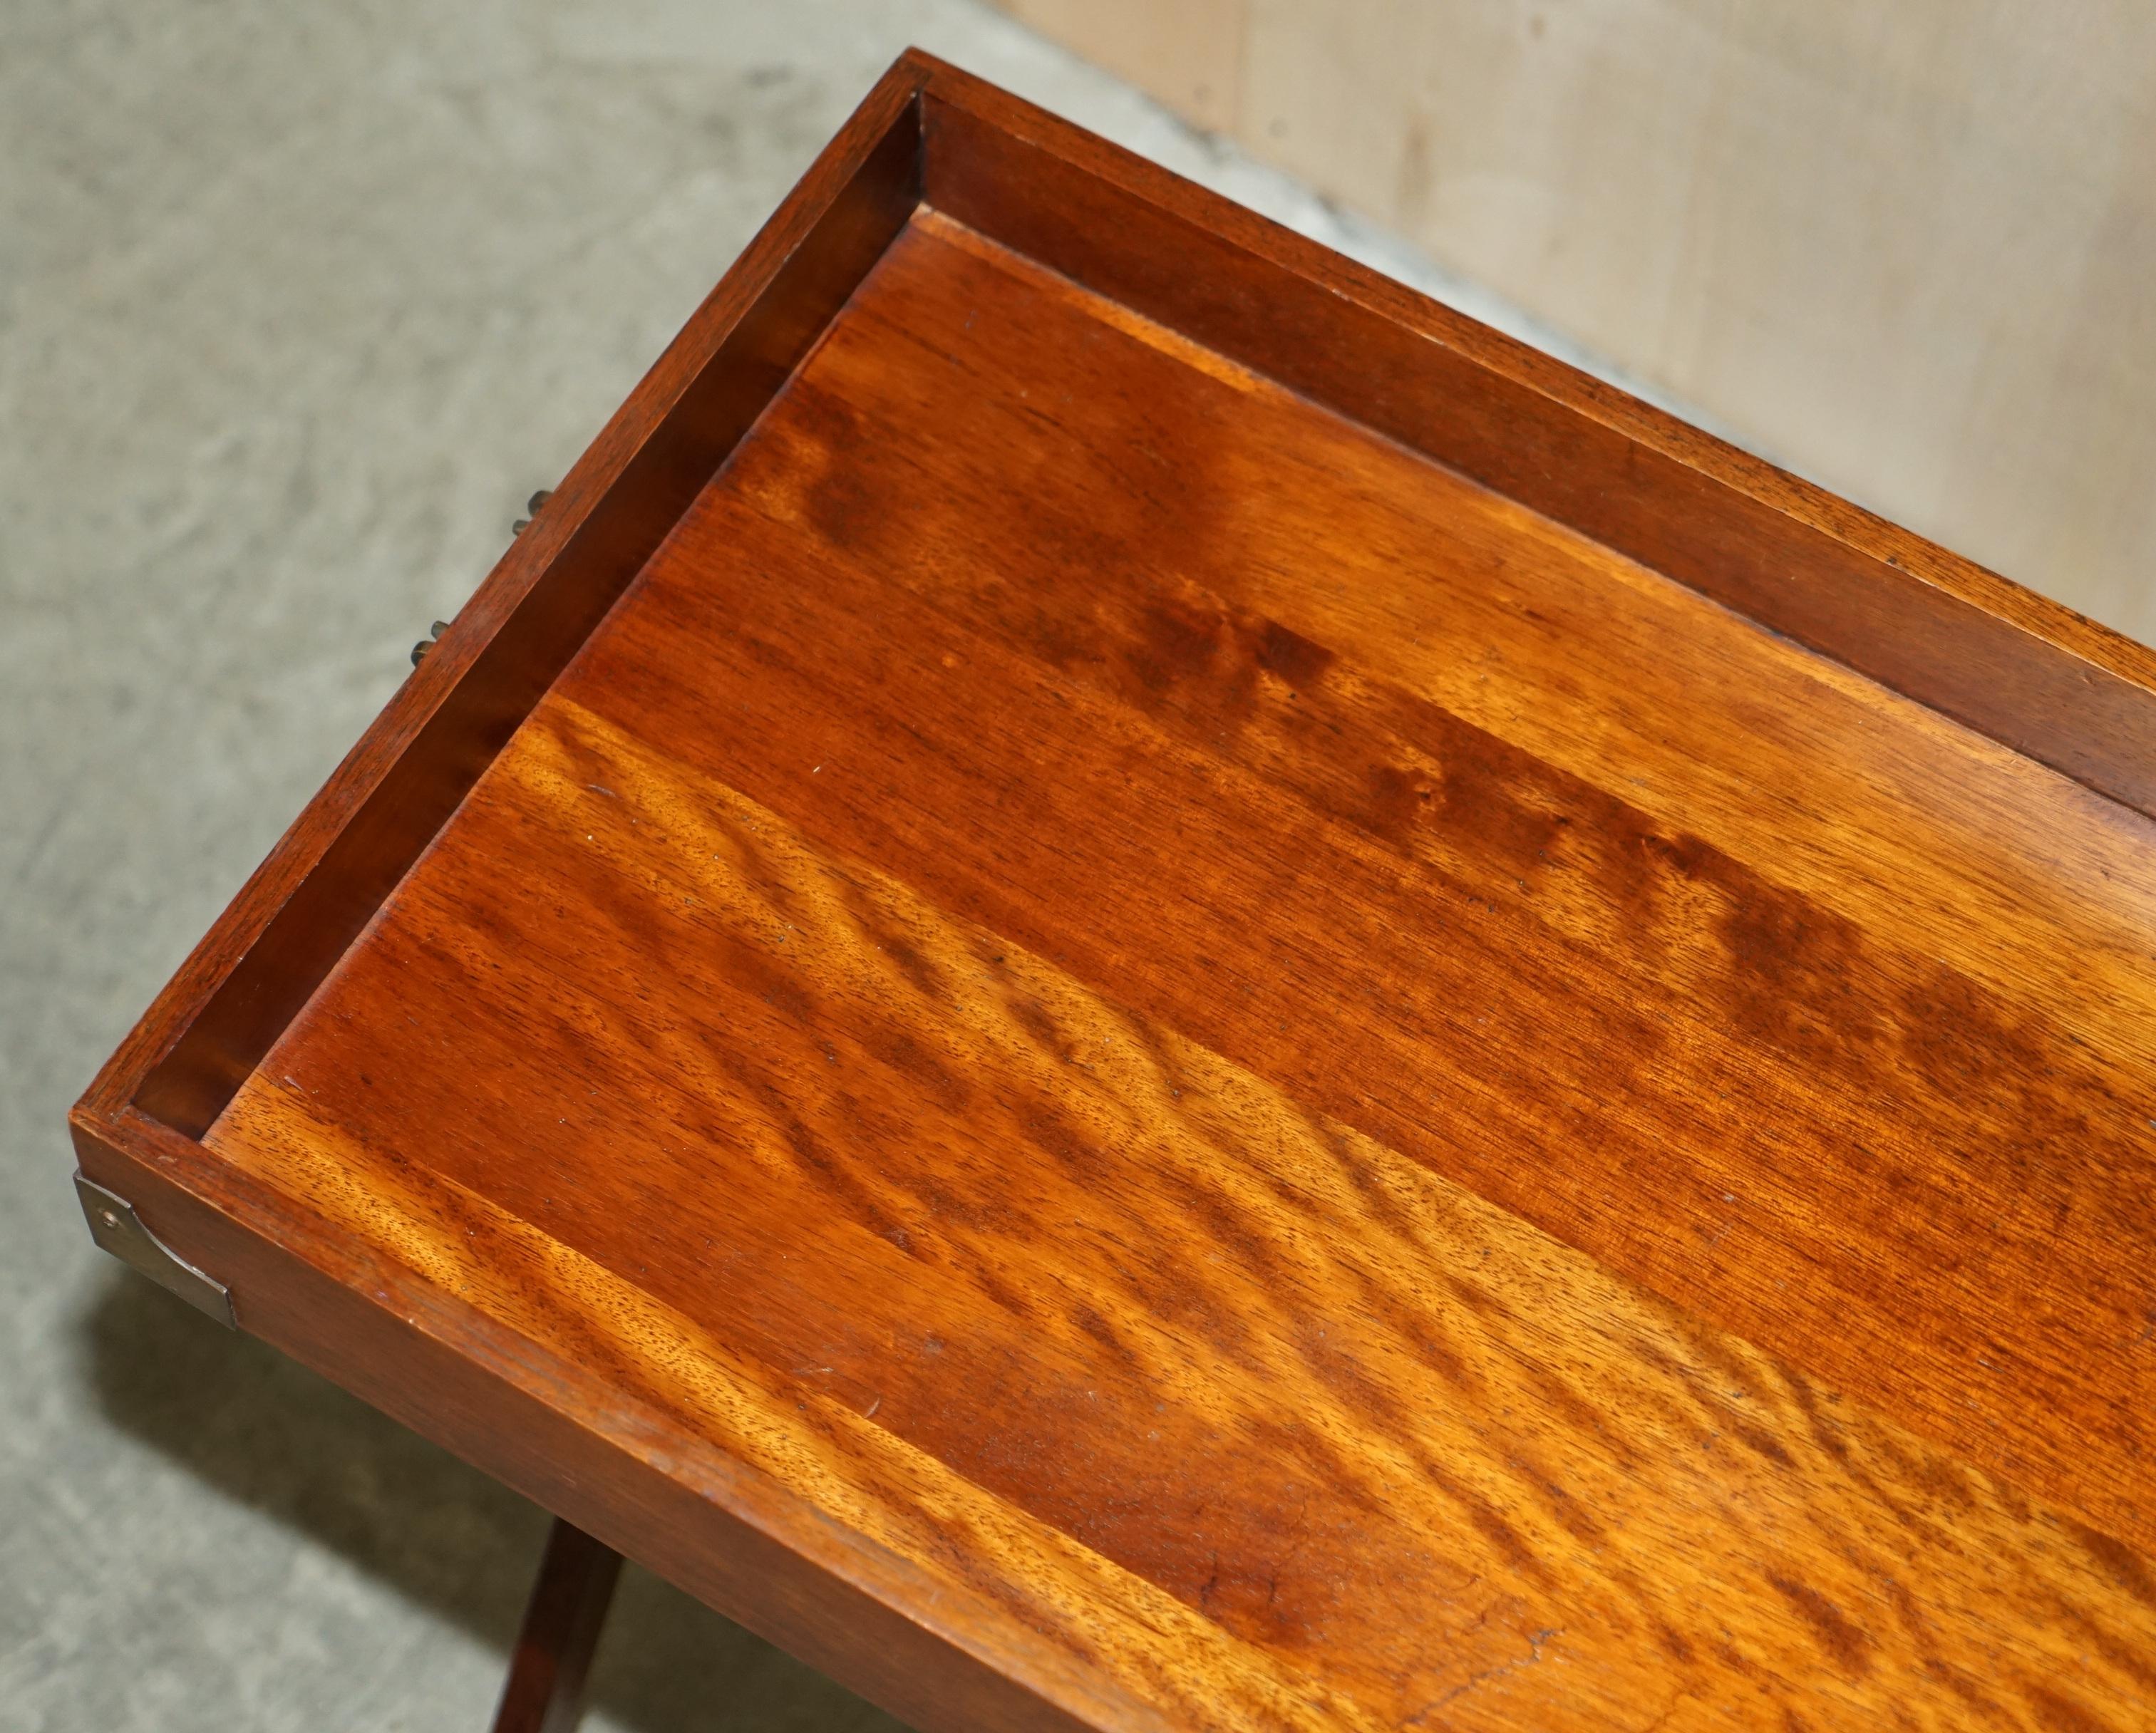 Hand-Crafted Vintage Hardwood Folding Campaign Tray Table with Removable Top for Butlers